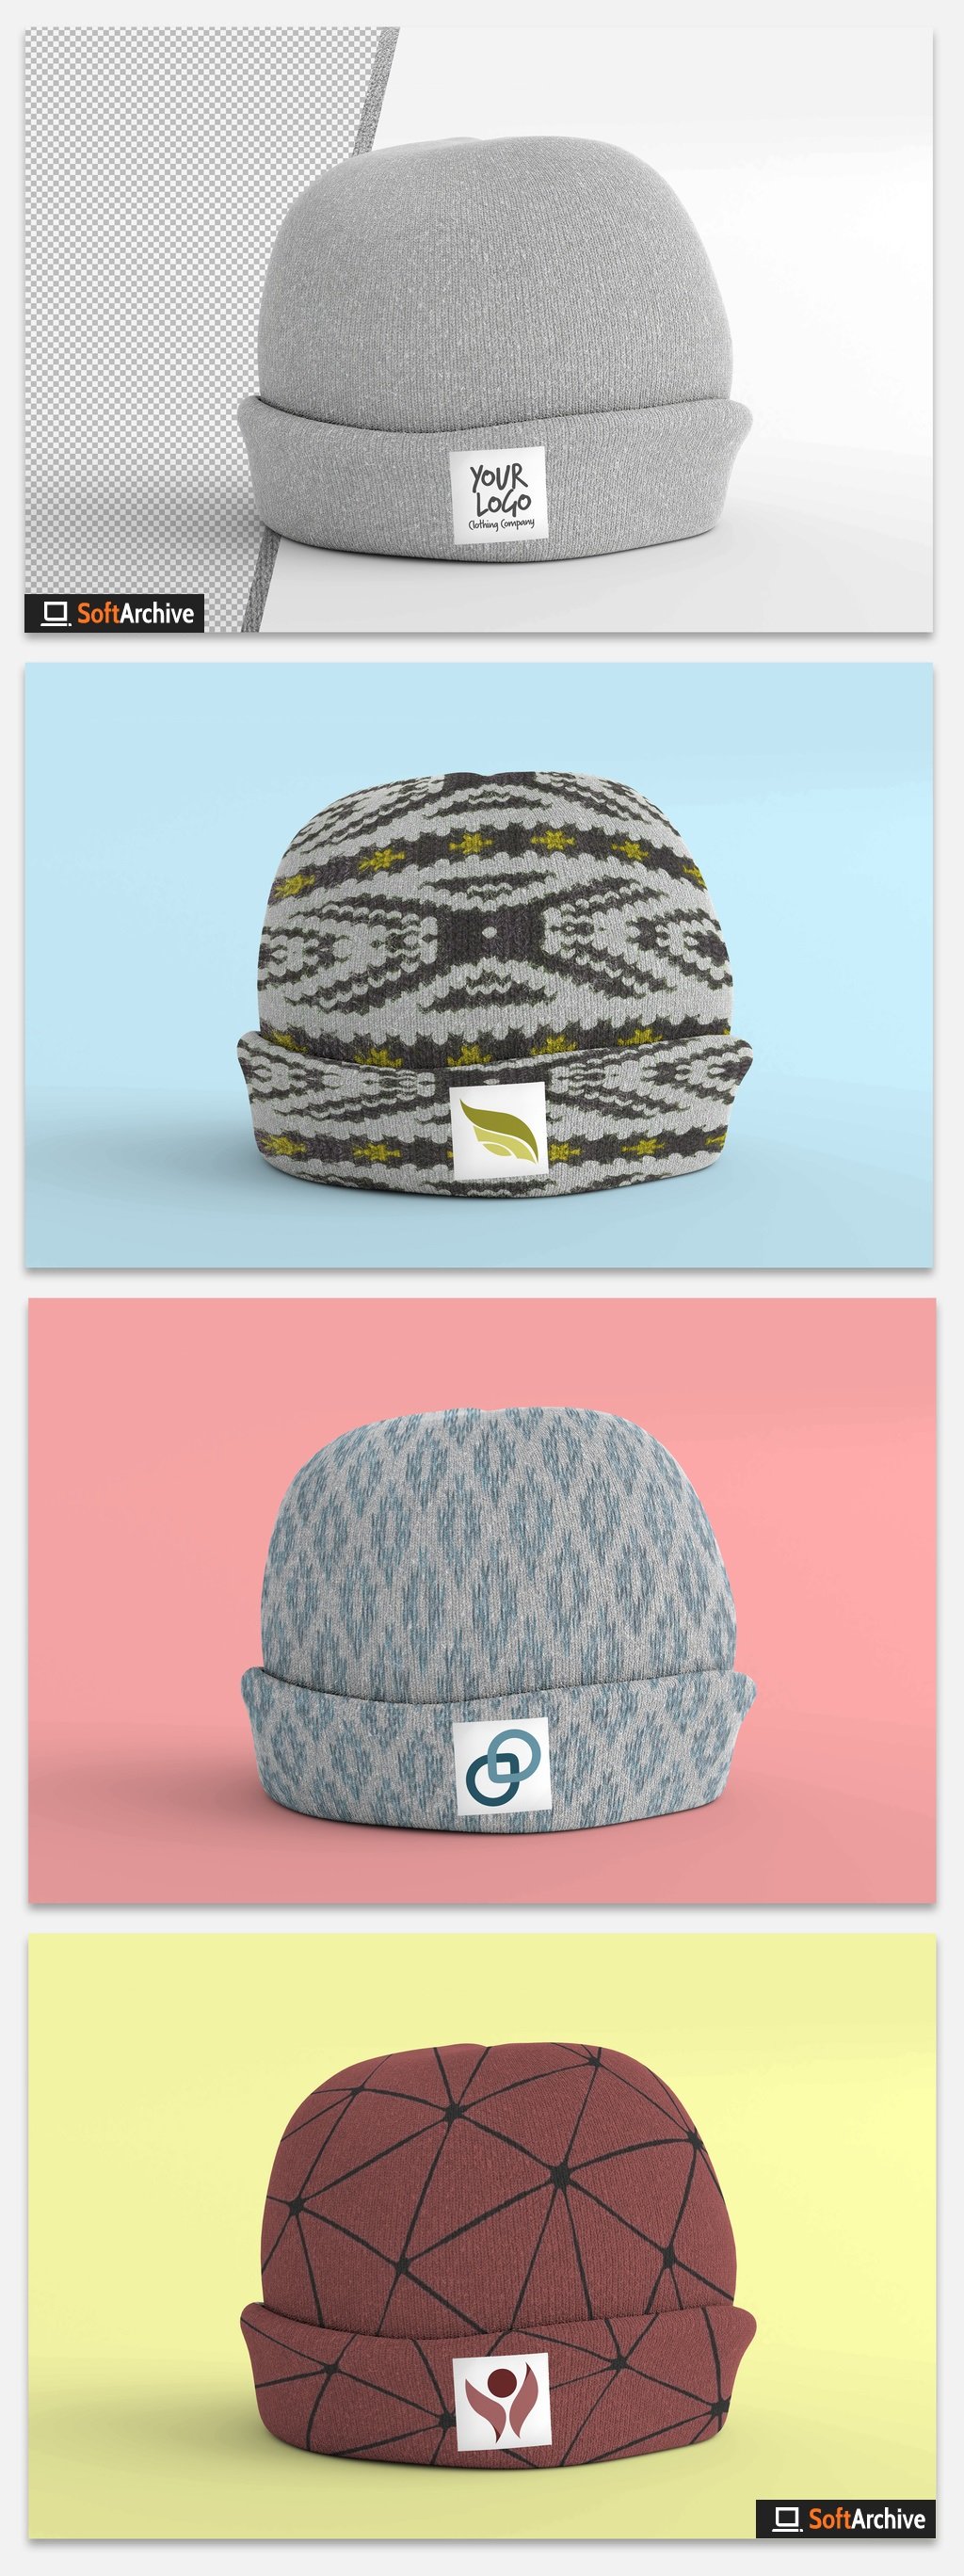 Download Download Mockup of a Beanie 358588913 - SoftArchive